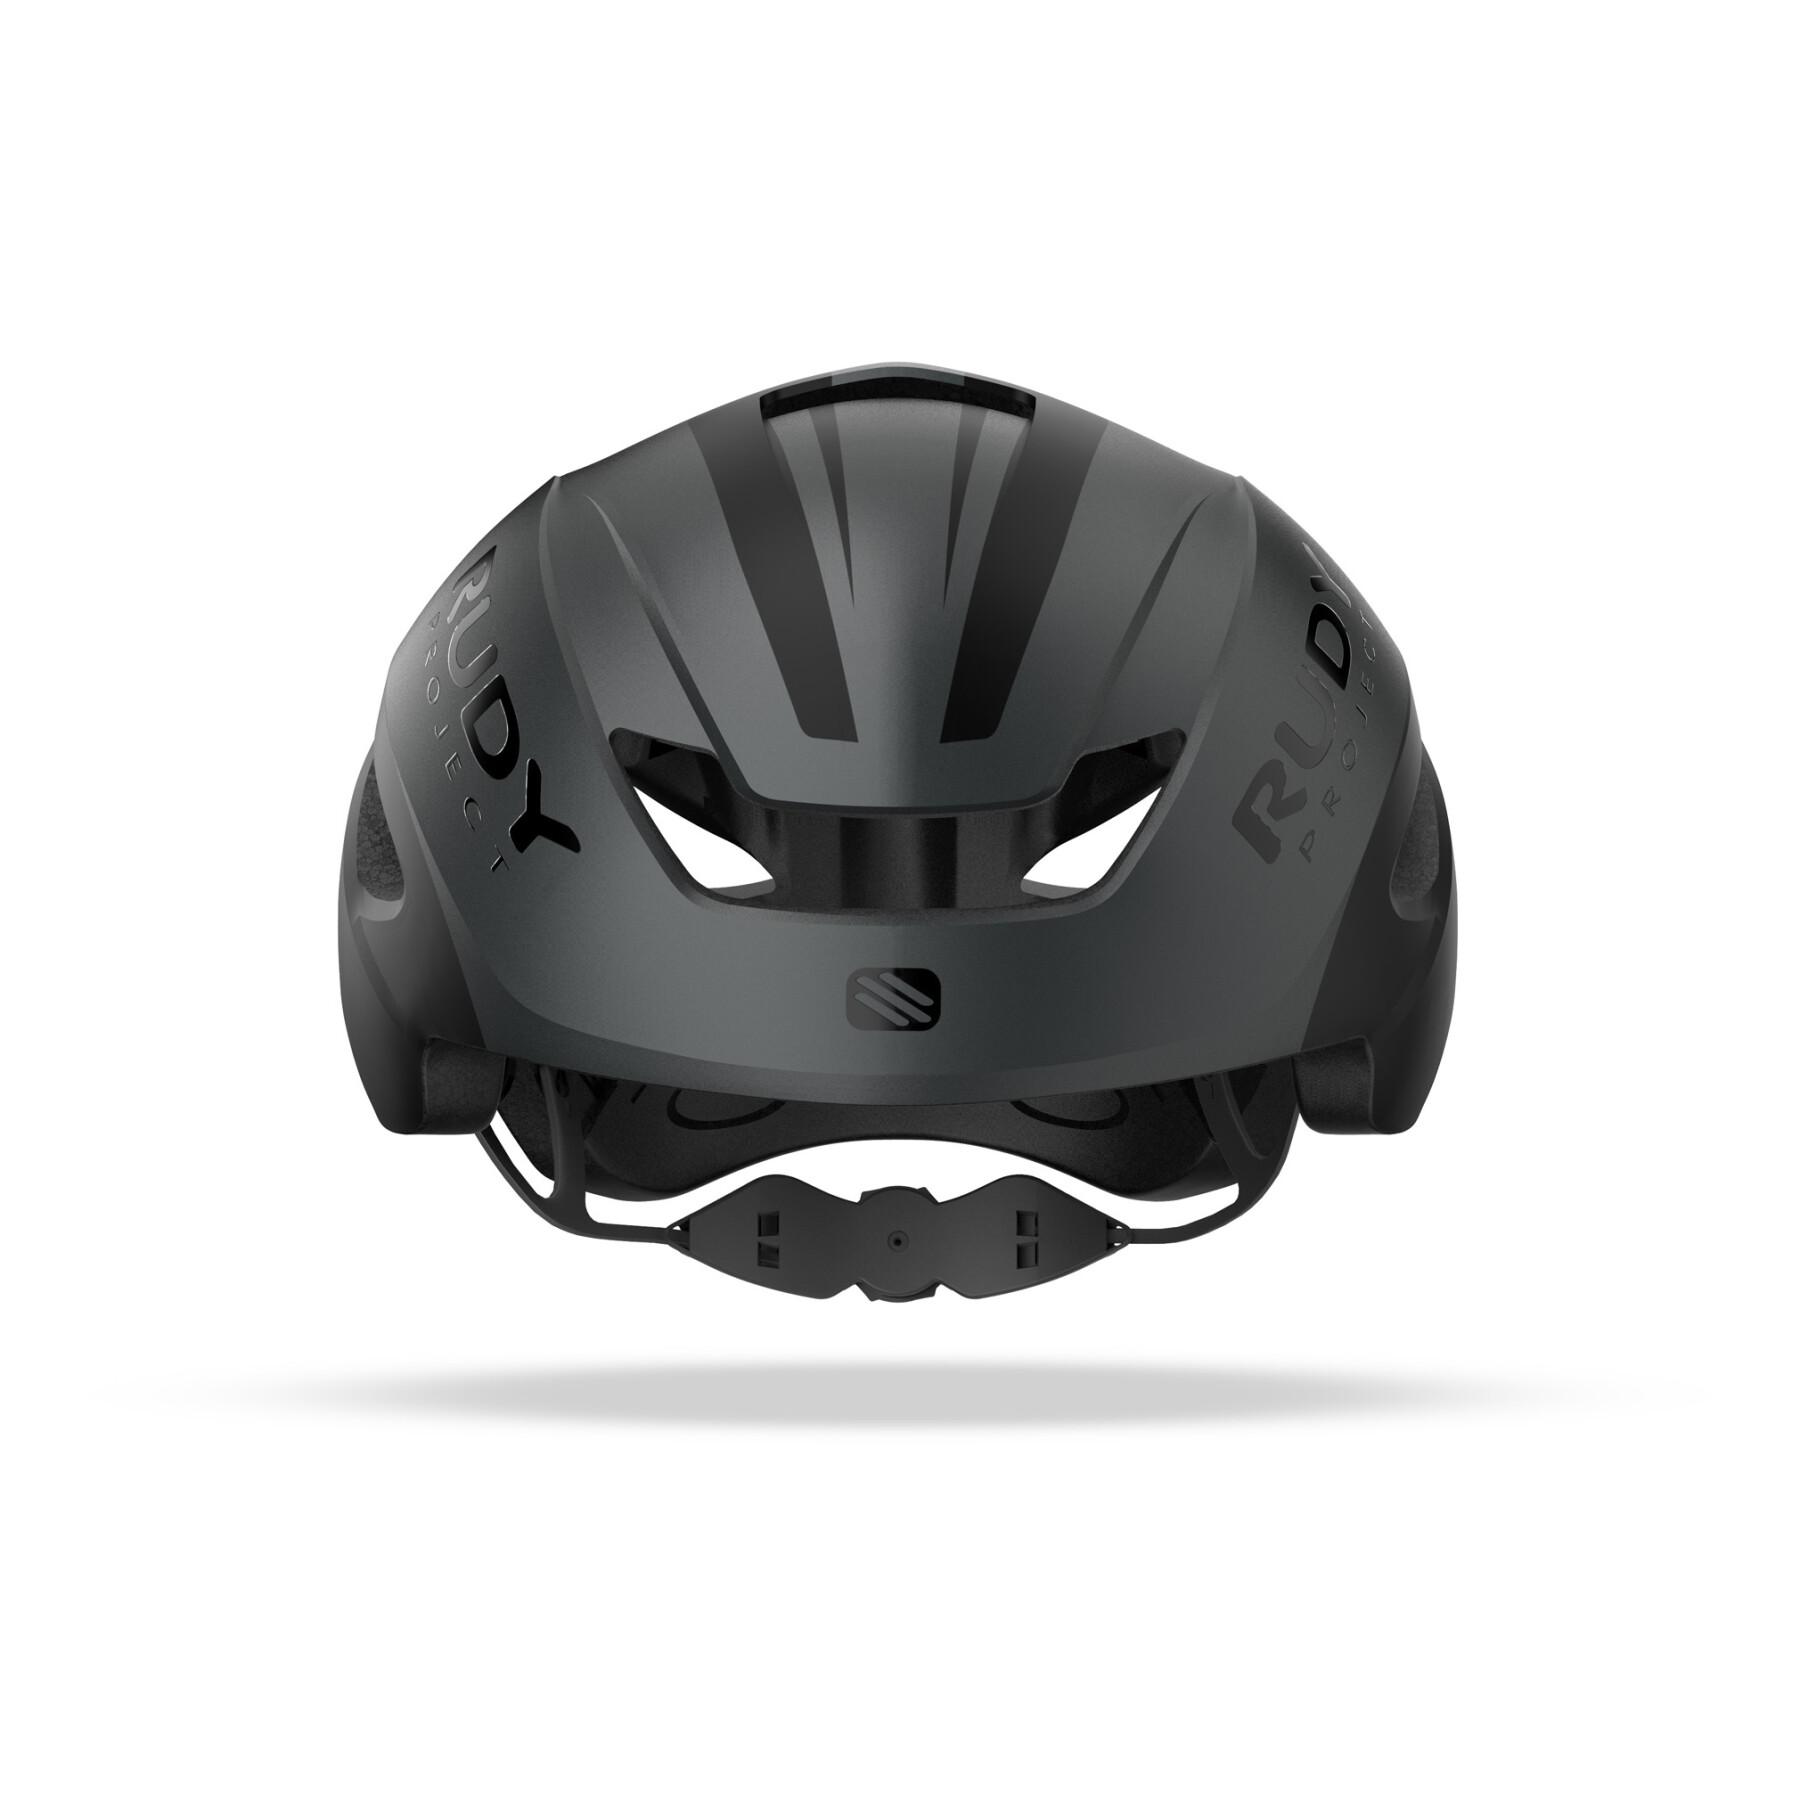 Kask rowerowy Rudy Project Volantis